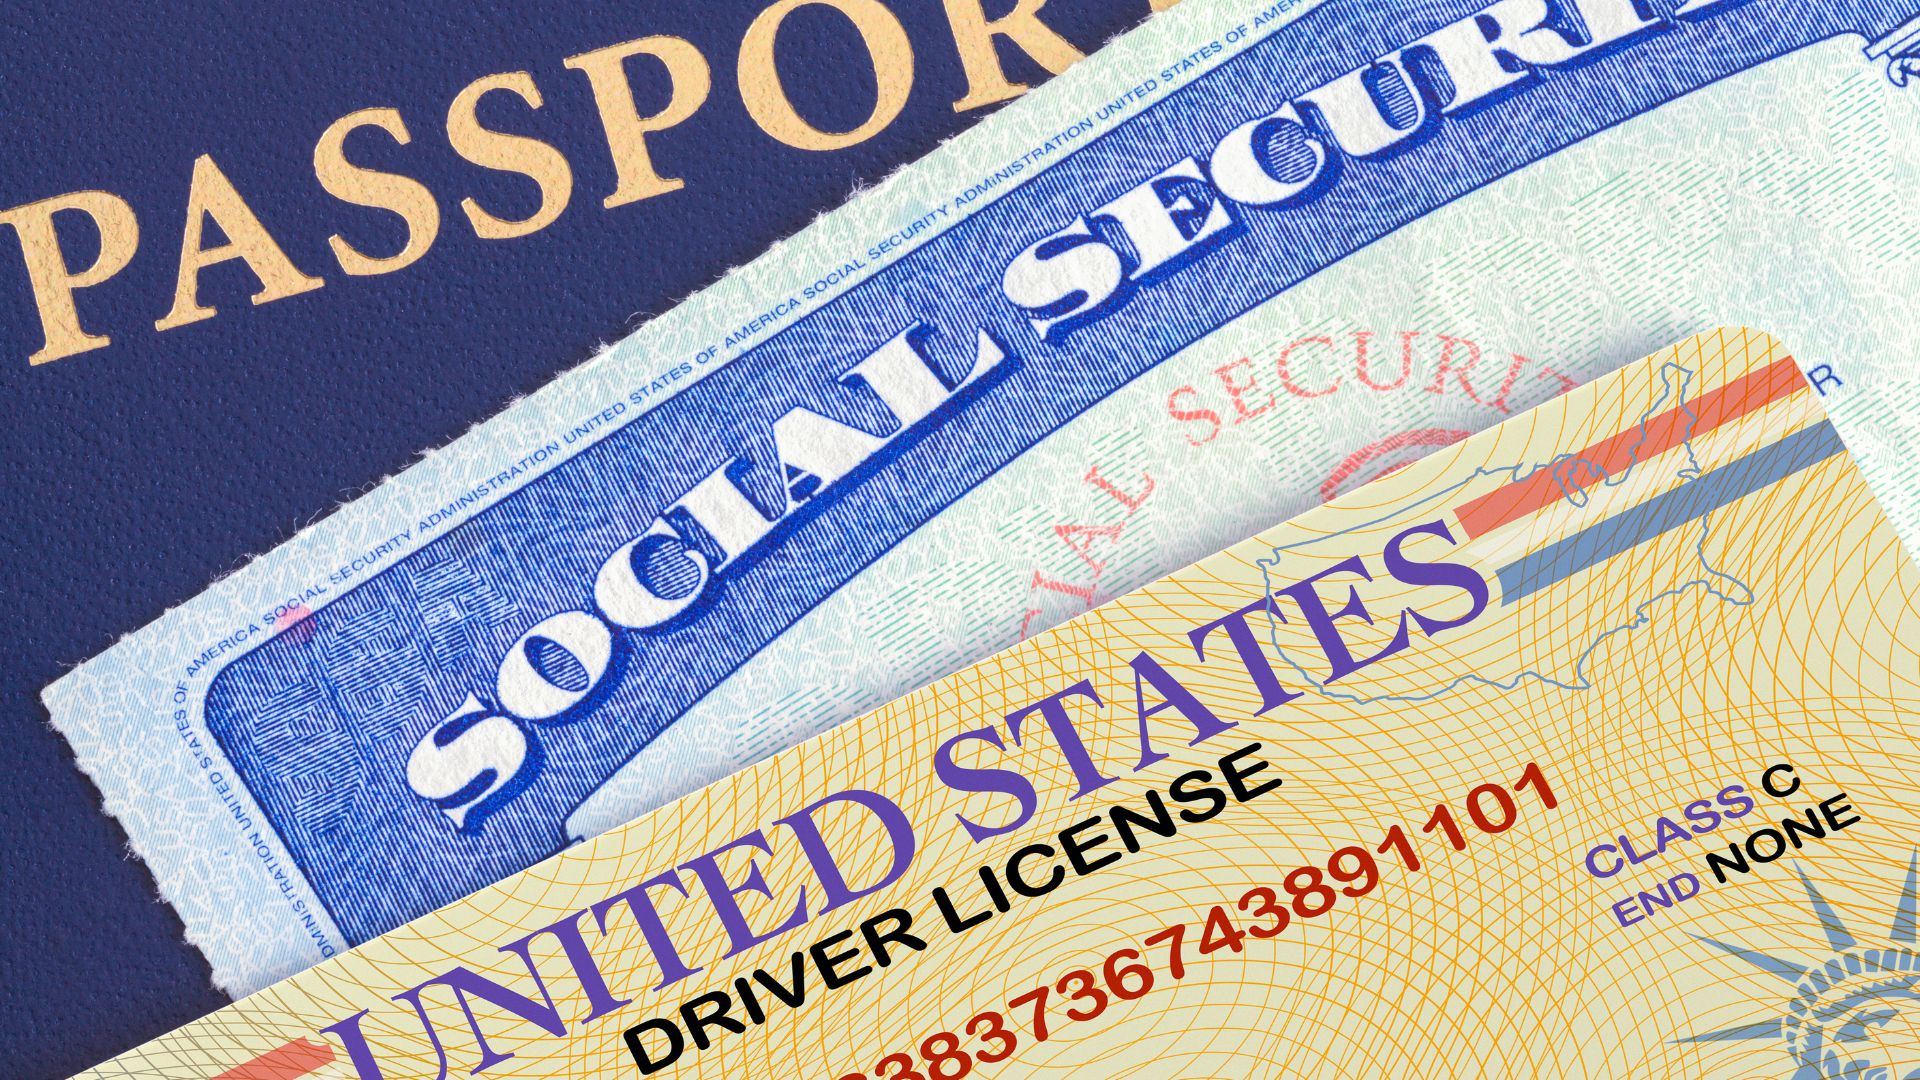 Multiple U.S. identity documents: passport, social security card and driver license